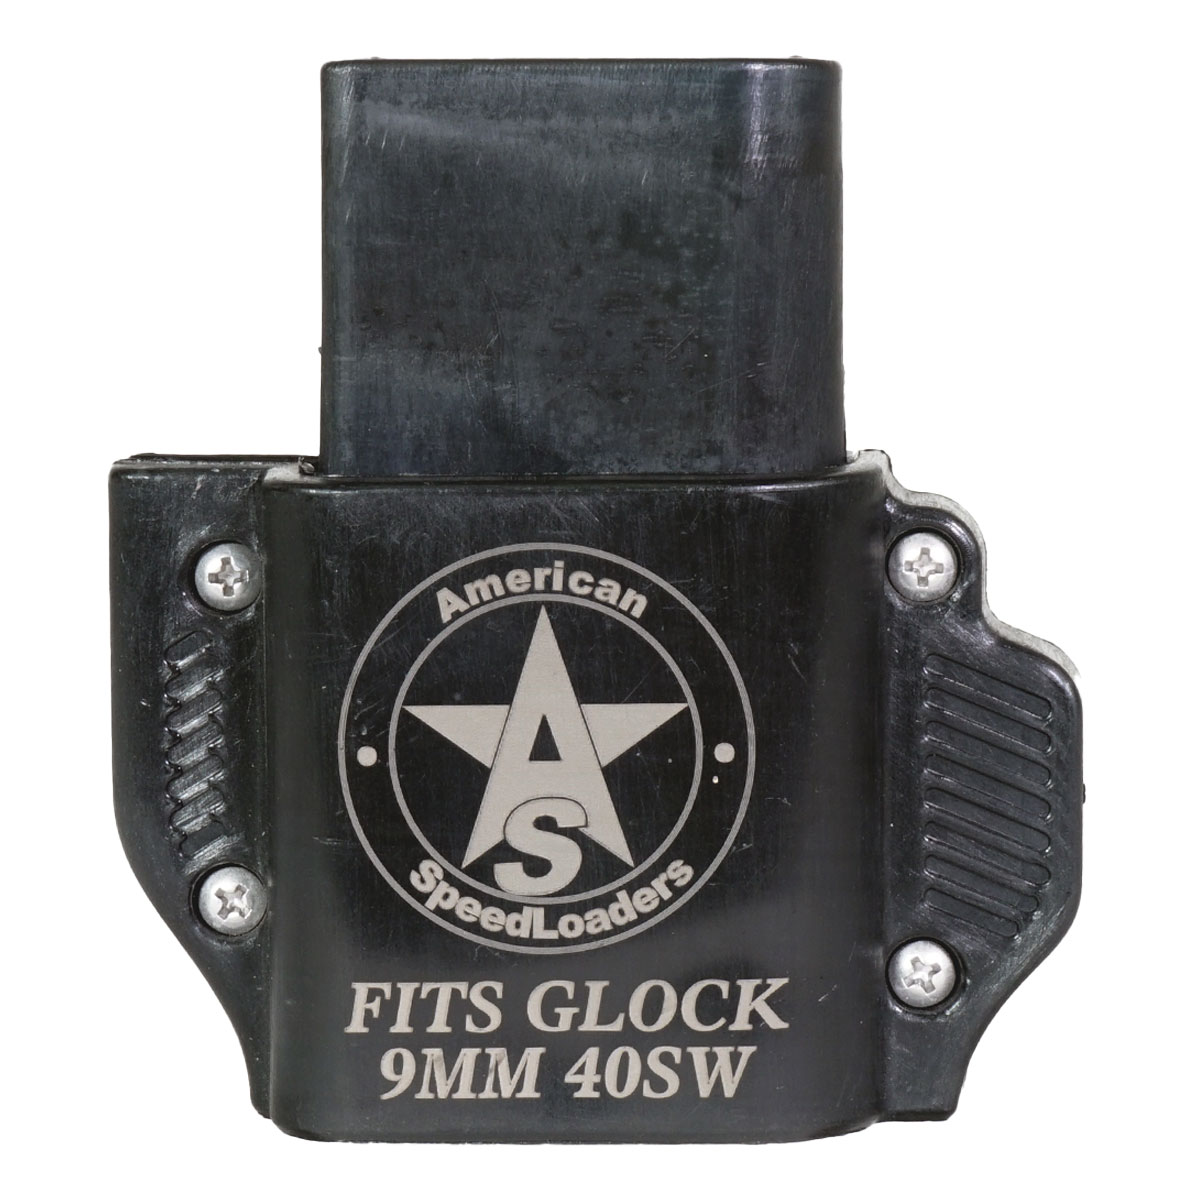 American Speed Loaders Glock Compatible 9mm / 40SW Magazine Speed Loader